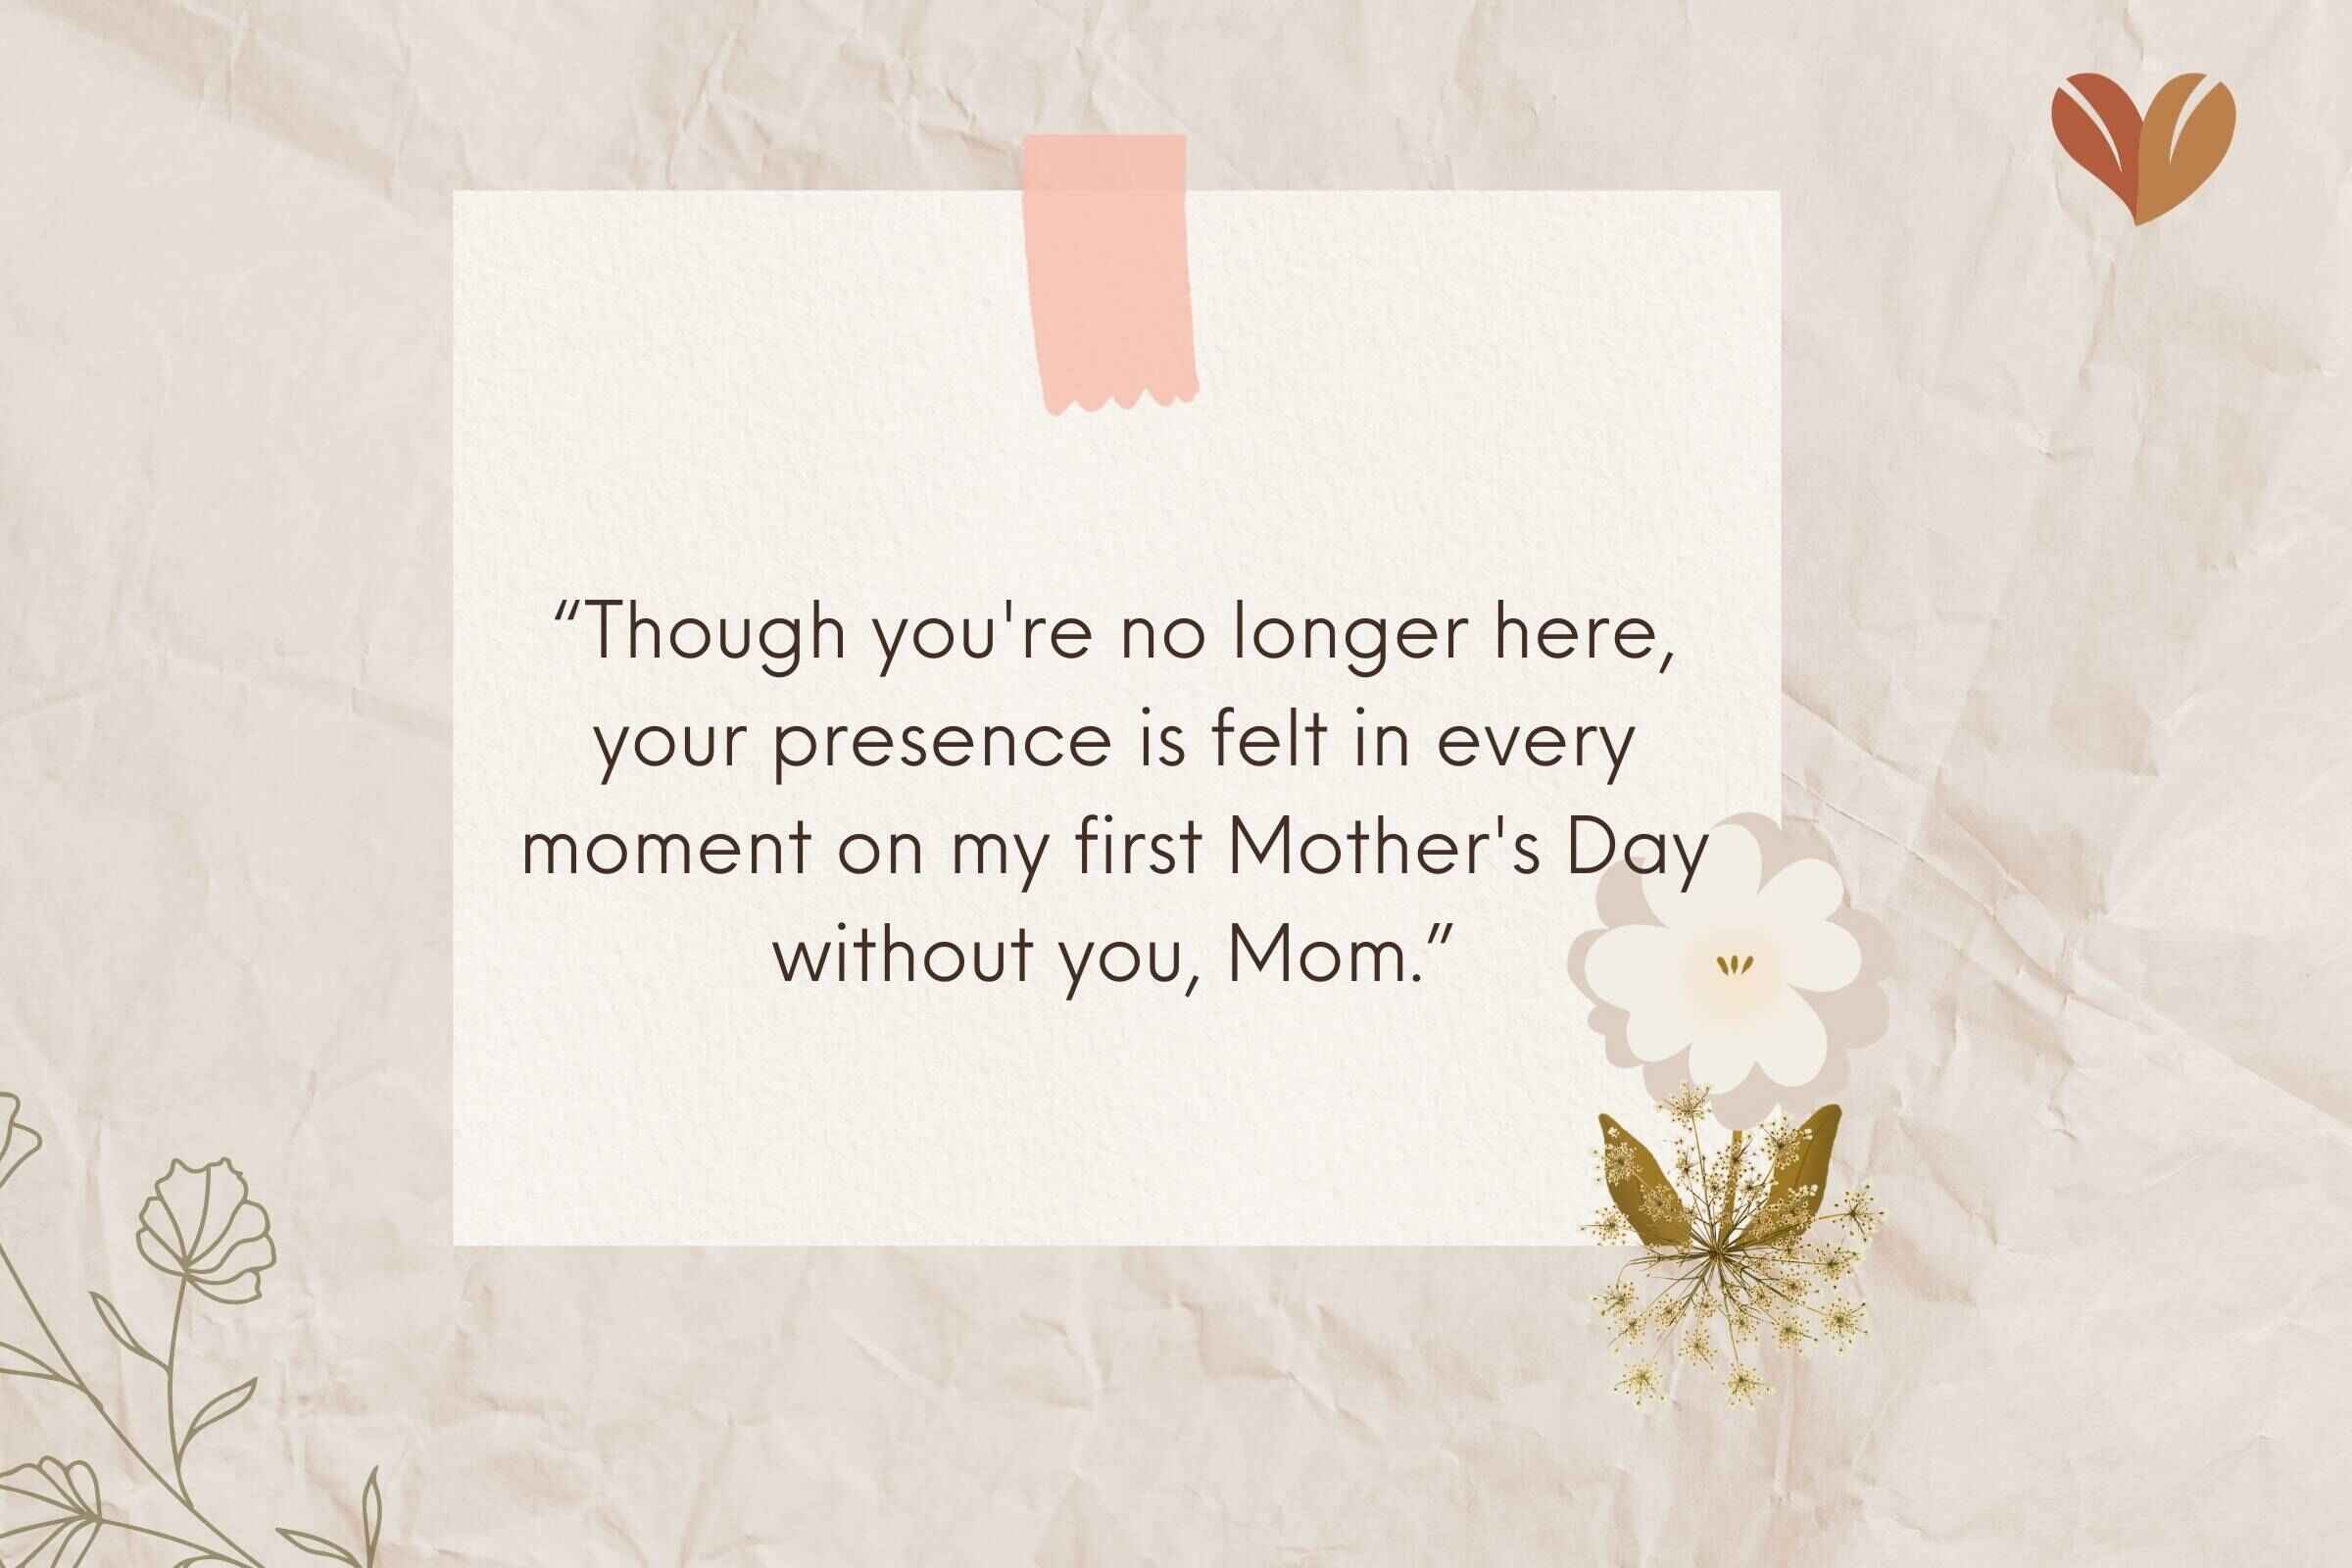 Heavenly Mother's Day Quotes: Missing Mom on First Mother's Day without her